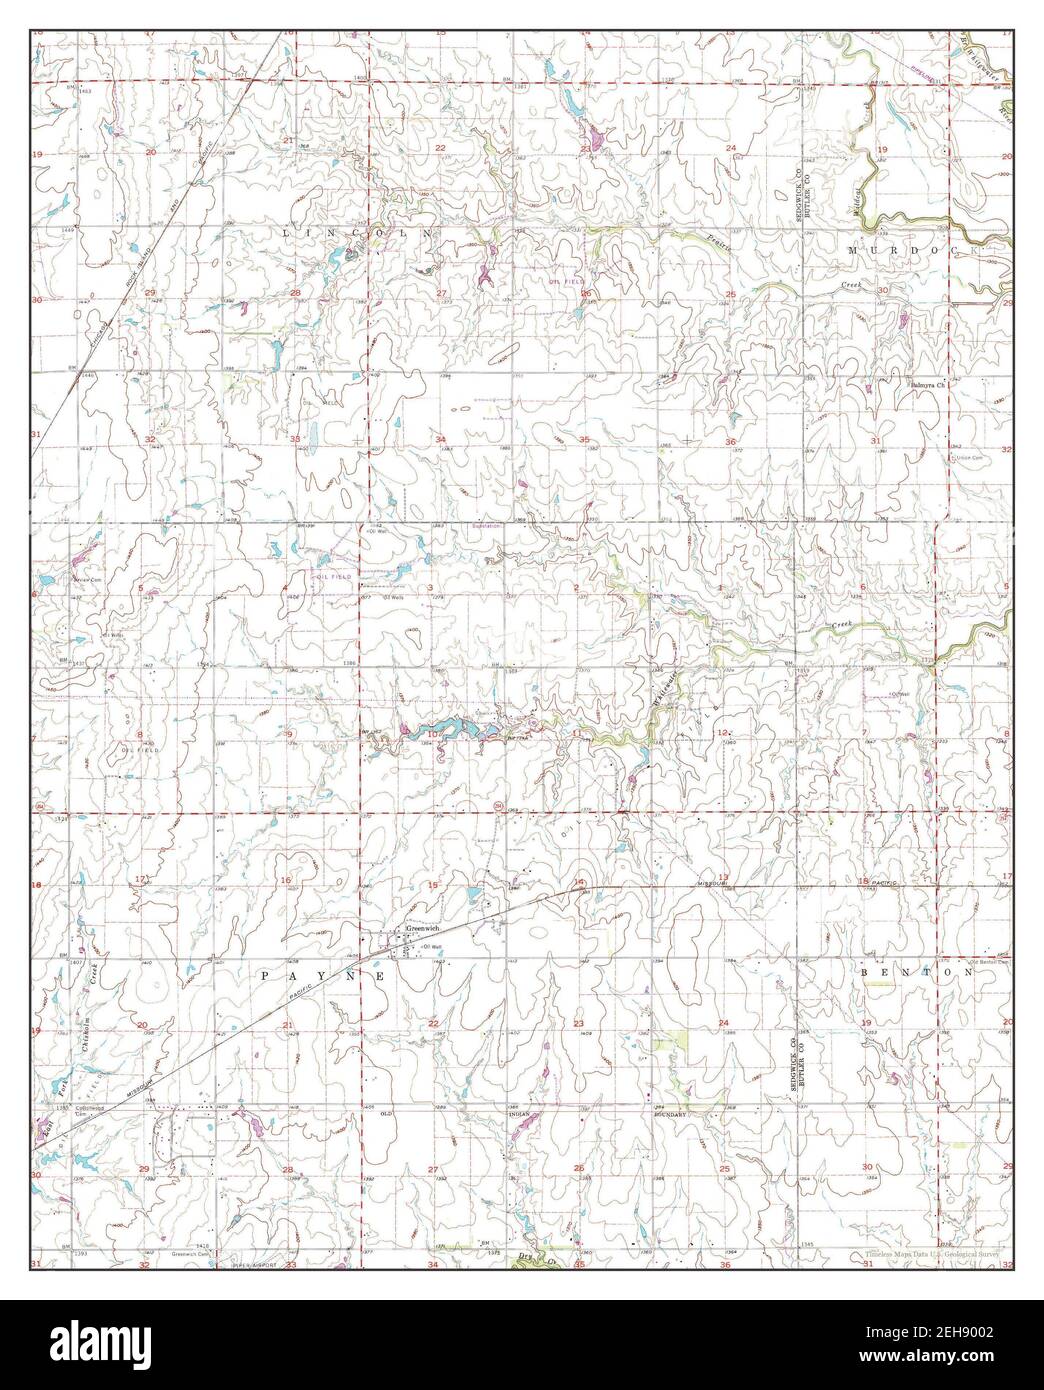 Greenwich, Kansas, map 1960, 1:24000, United States of America by Timeless Maps, data U.S. Geological Survey Stock Photo